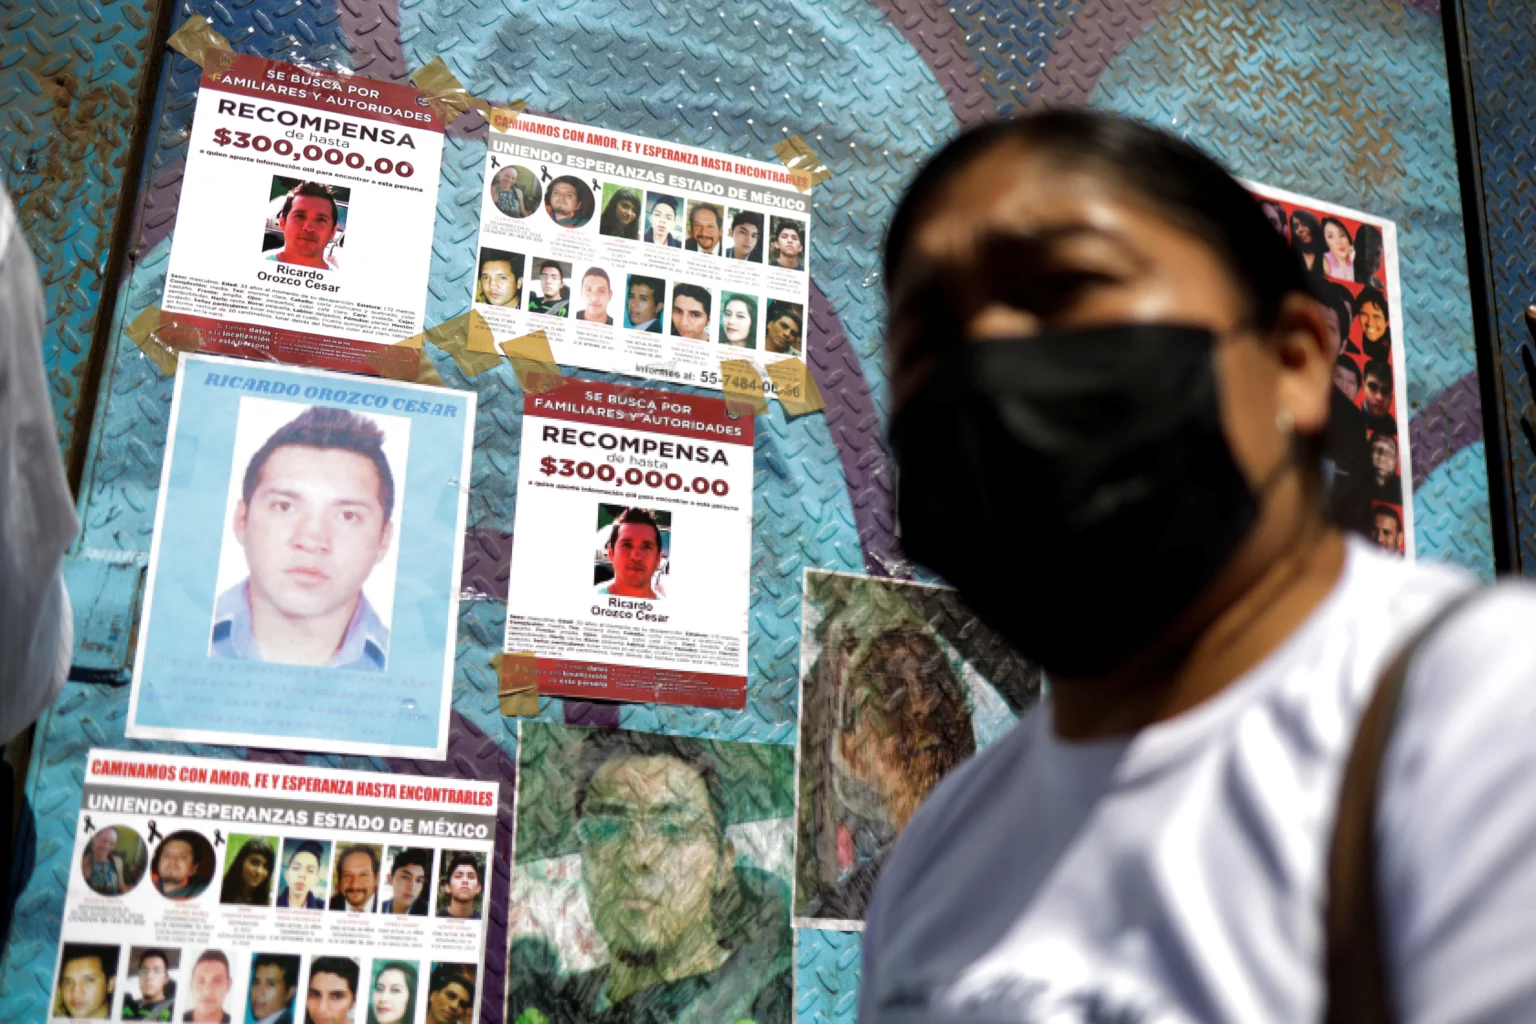 un-raises-concerns-over-alarming-number-of-missing-people-in-mexico